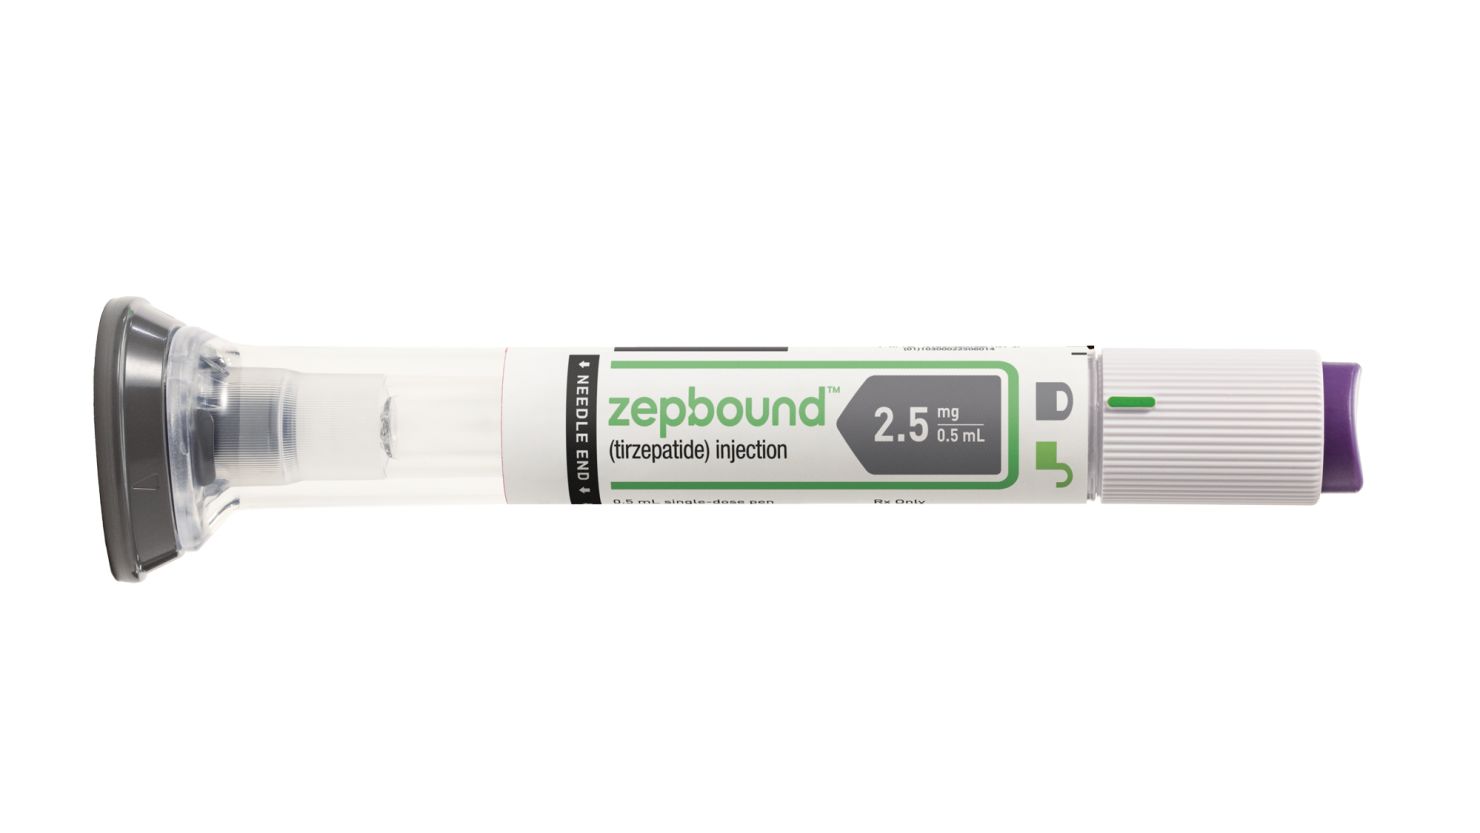 The U.S. Food and Drug Administration (FDA) approved Eli Lilly and Company's (NYSE: LLY) Zepbound™ (tirzepatide) injection, the first and only obesity treatment of its kind that activates both GIP (glucose-dependent insulinotropic polypeptide) and GLP-1 (glucagon-like peptide-1) hormone receptors.